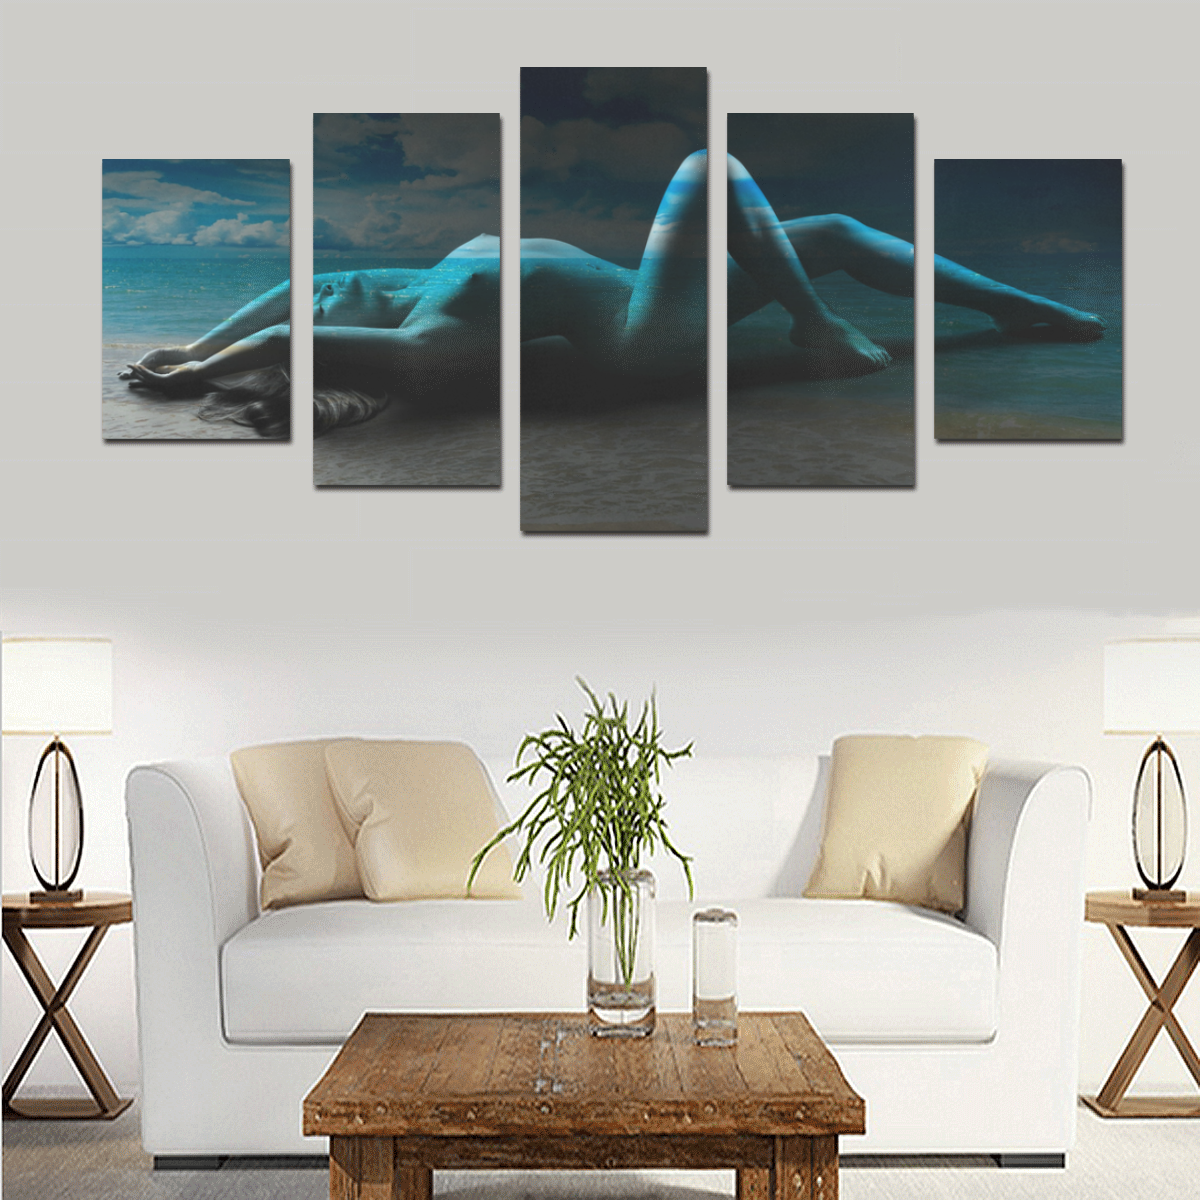 Blue Nude Woman With Sea Canvas Print Sets D (No Frame)